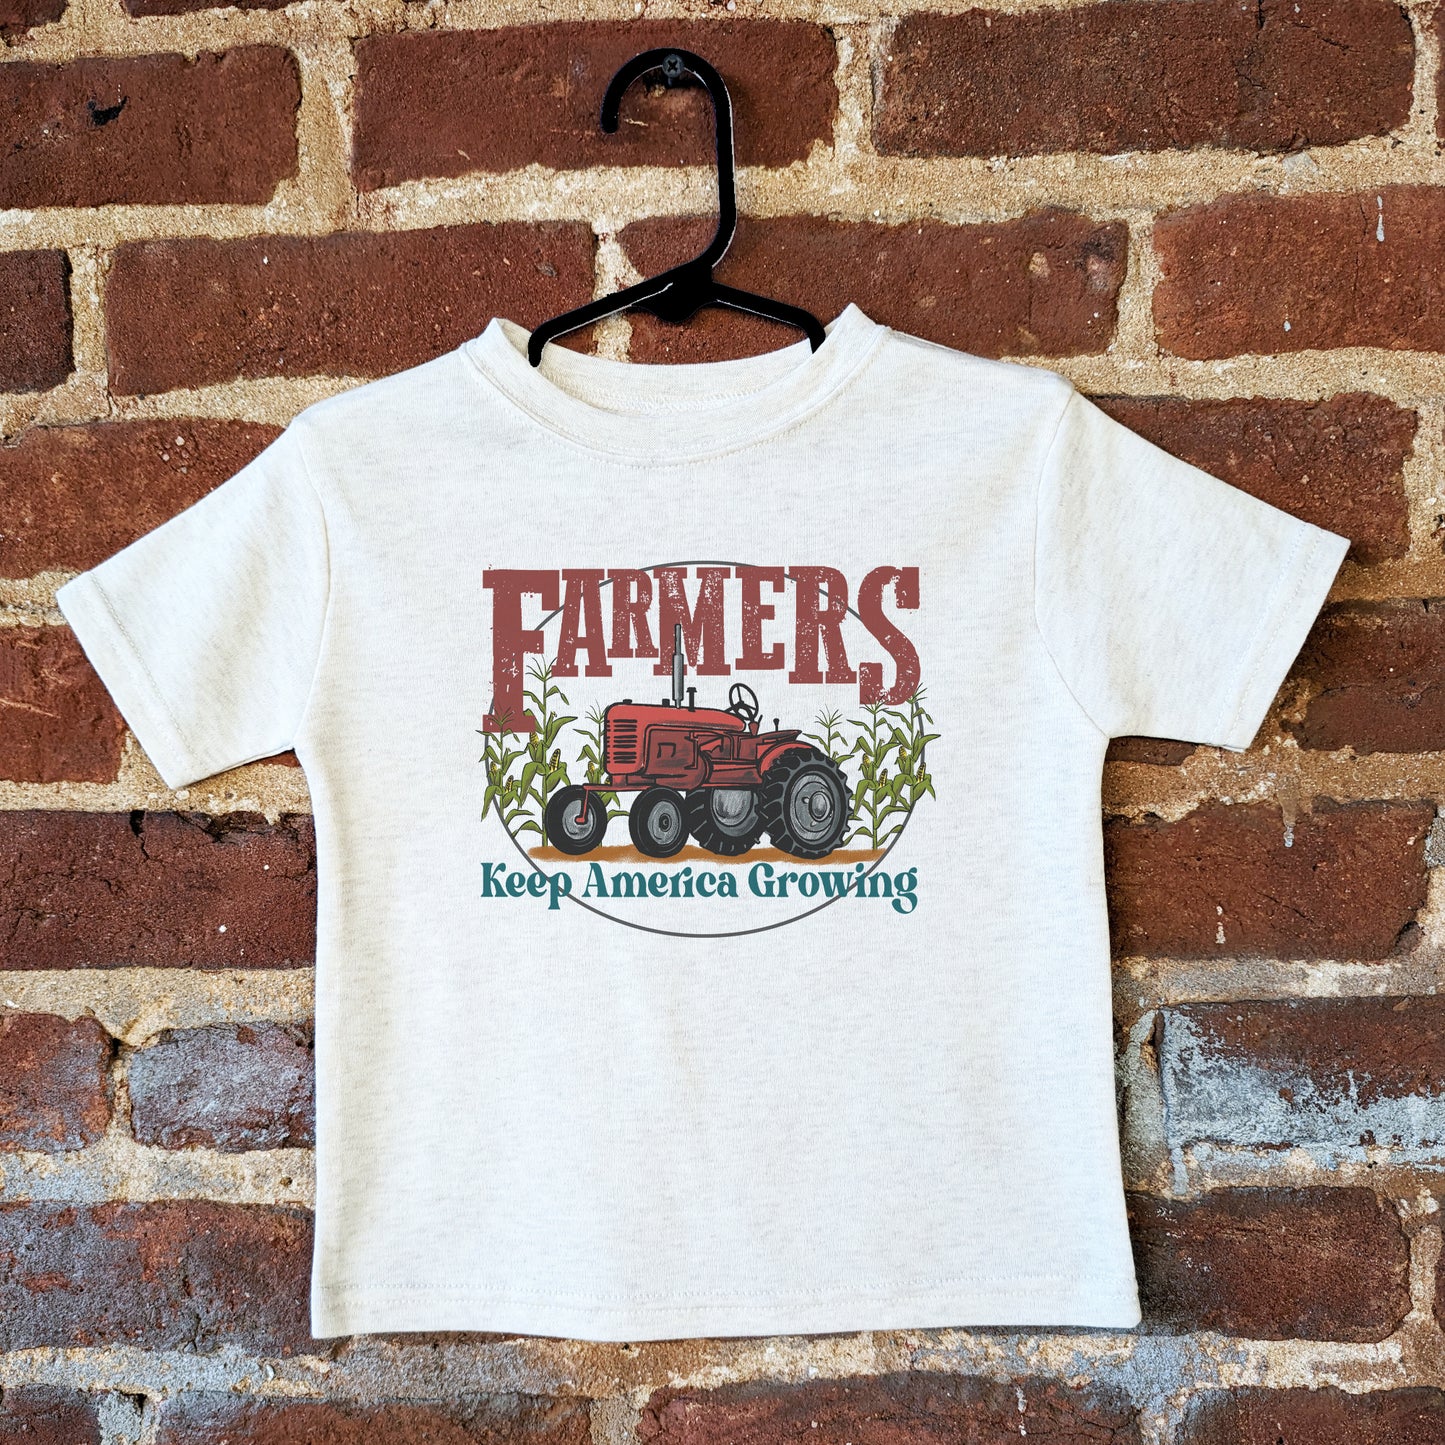 "Farmers keep America growing" Beige Toddler/Youth Tee. Red tractor